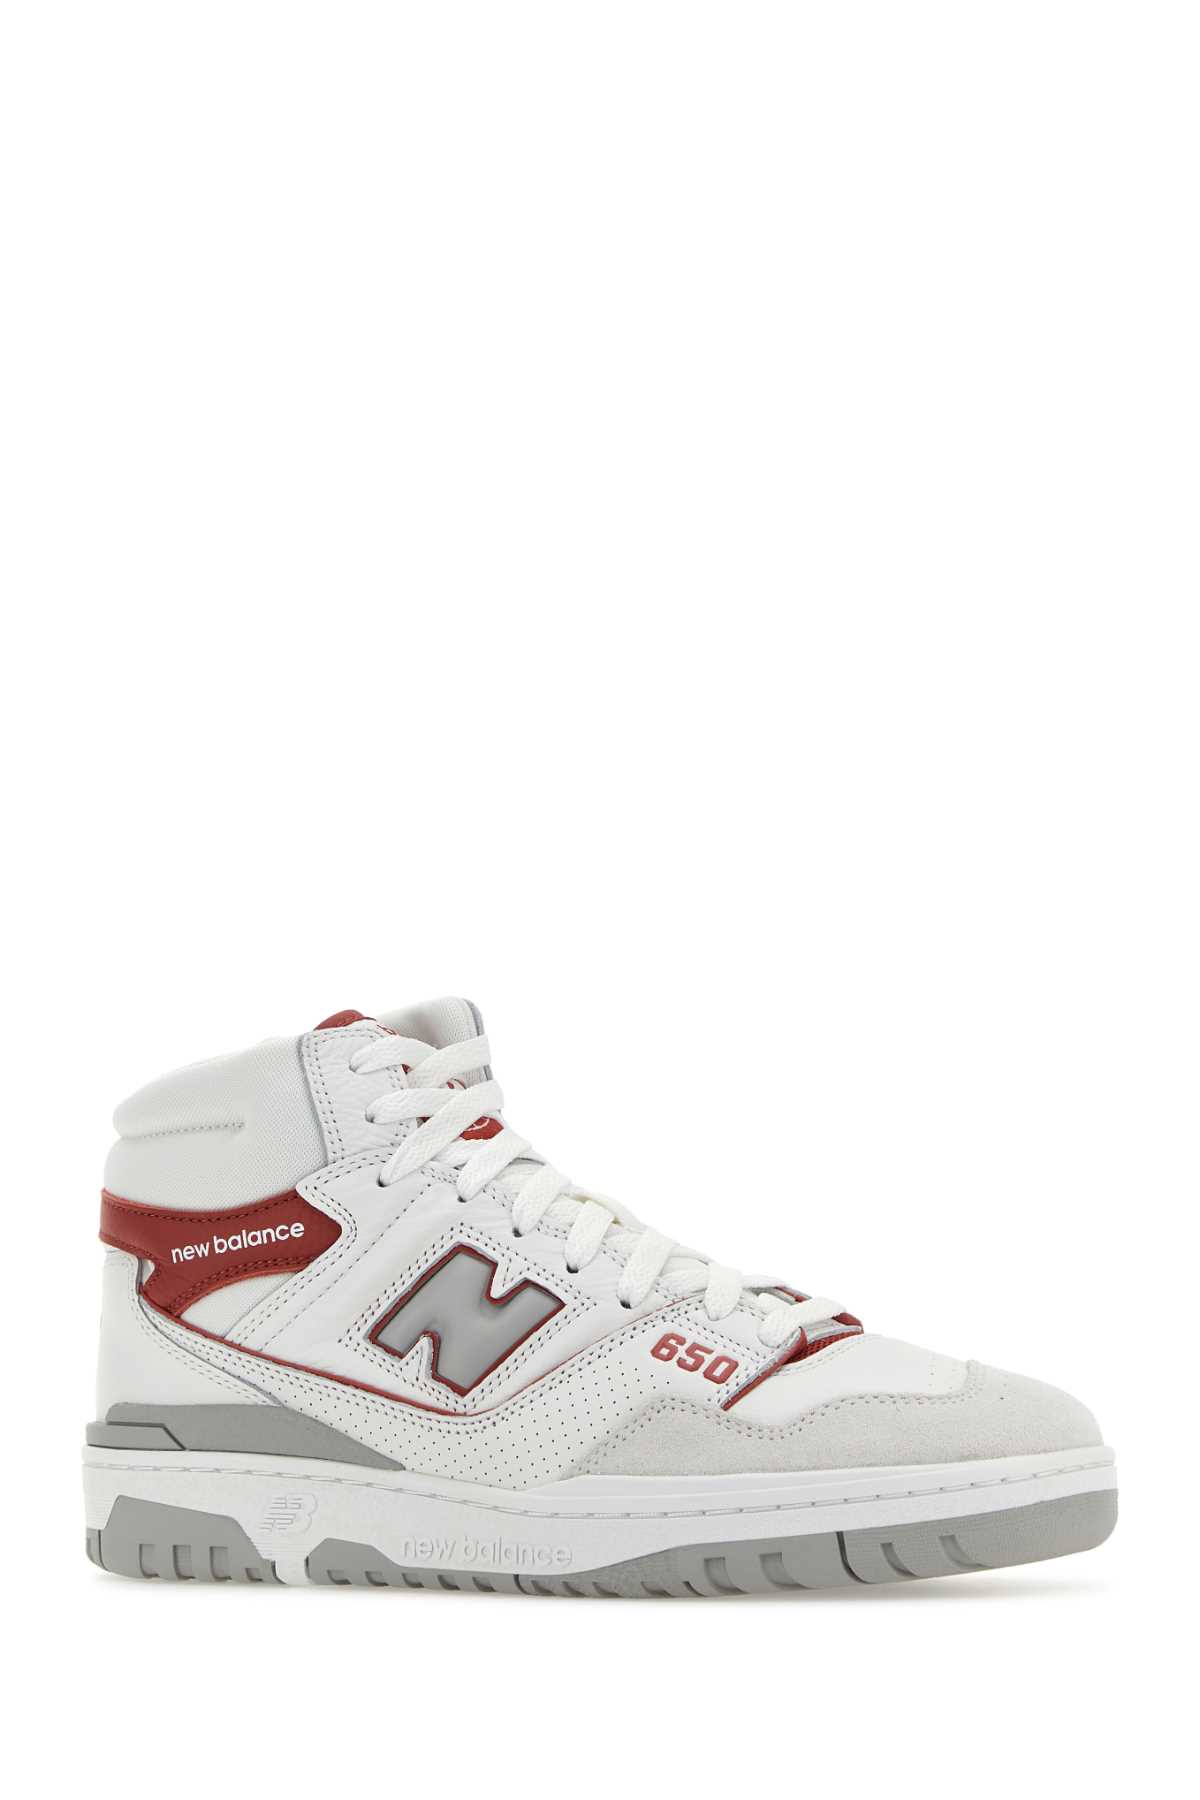 New Balance Multicolor Leather And Suede 650 Sneakers In White